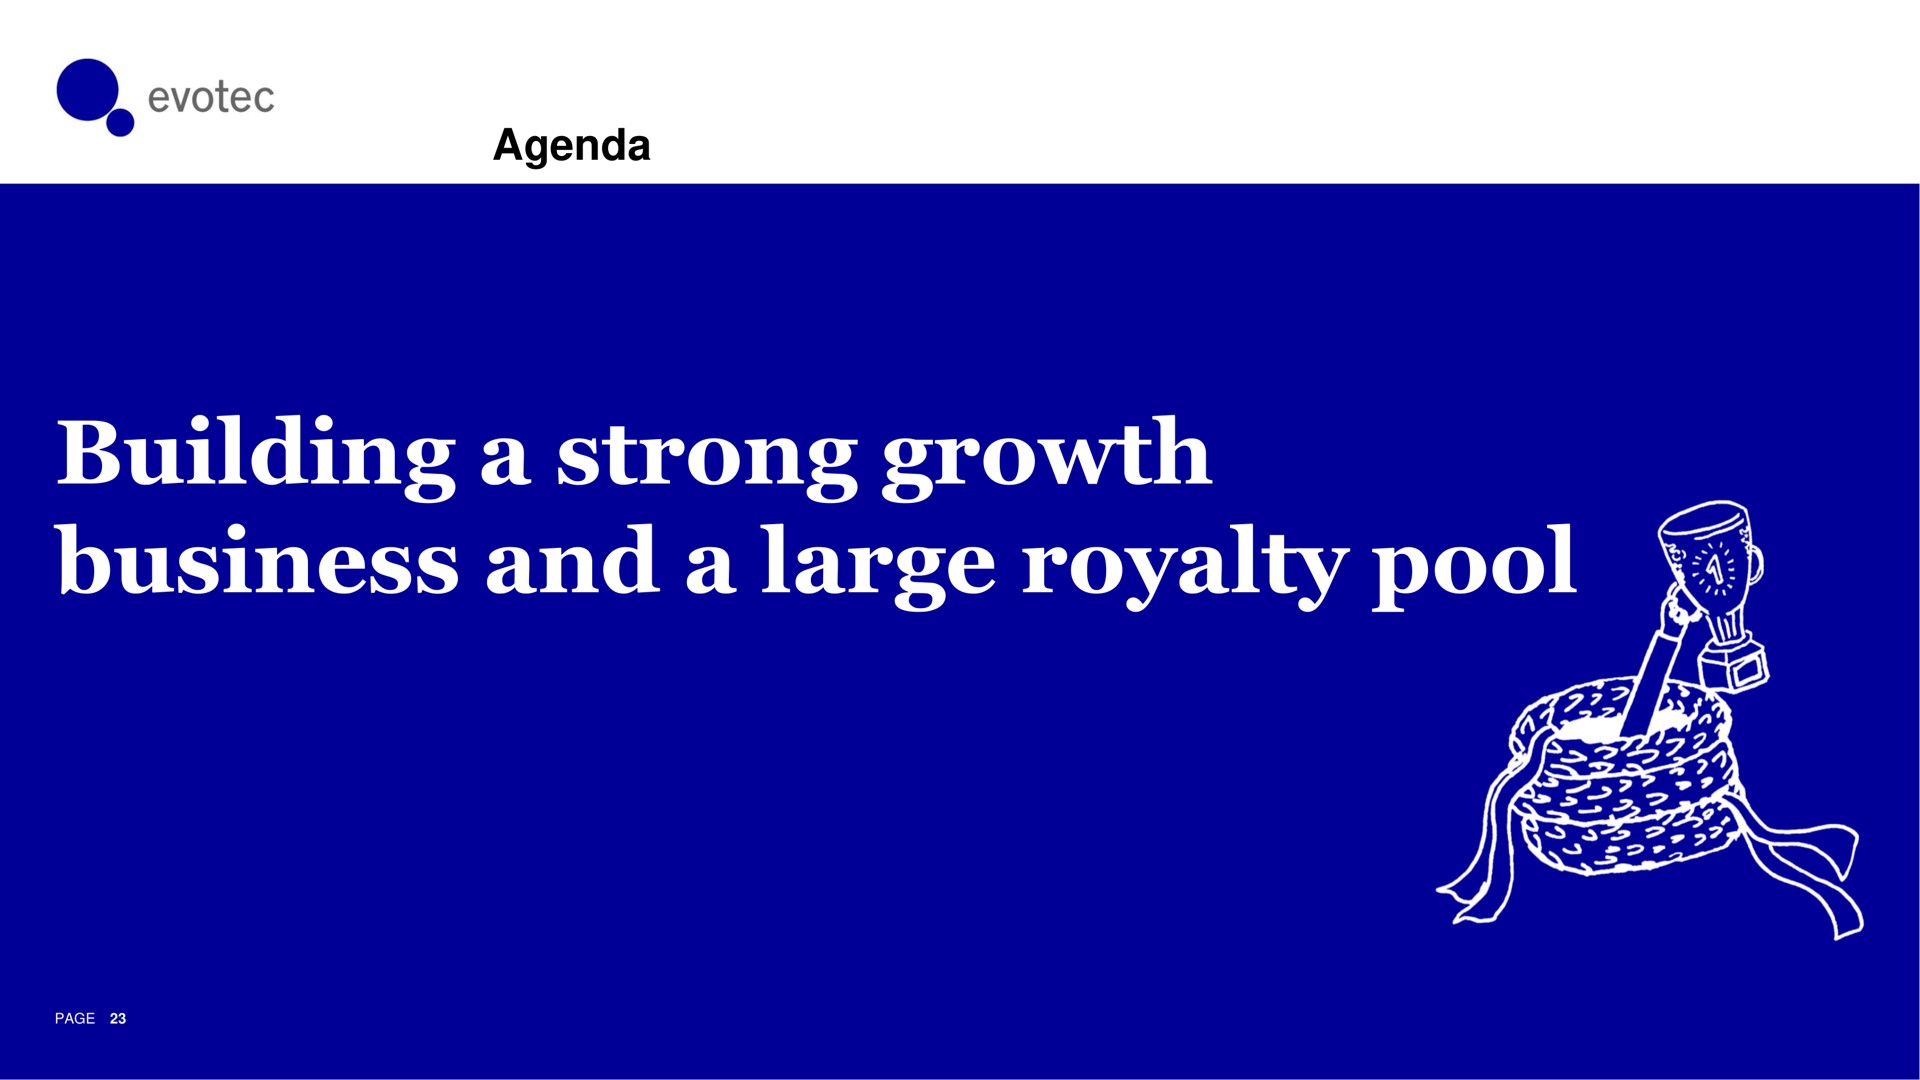 agenda building a strong growth business and a large royalty pool | Evotec